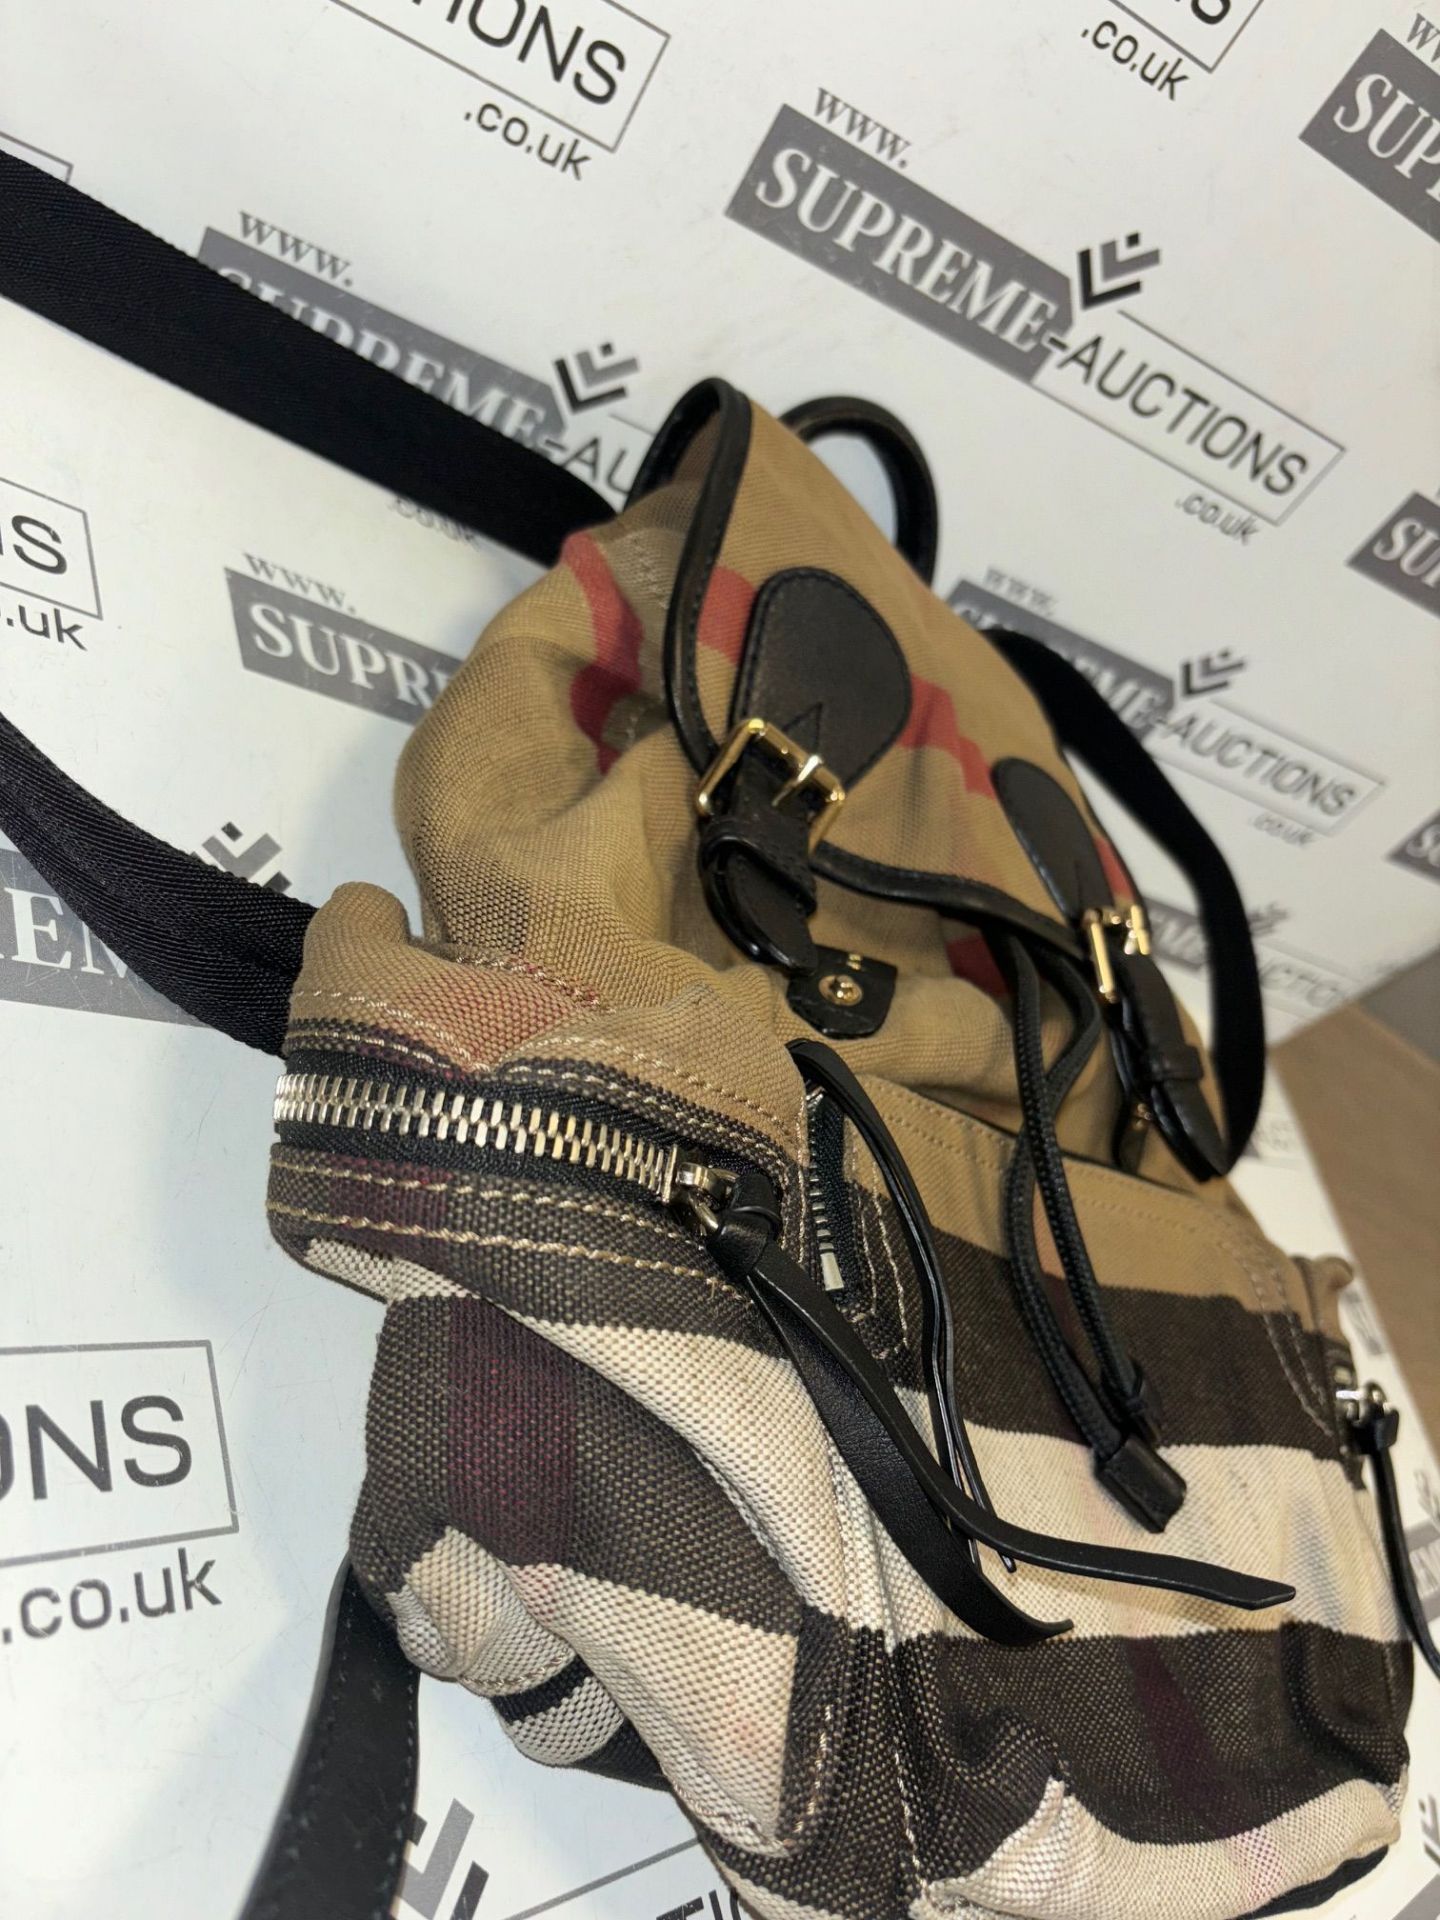 Genuine Burberry Canvas Backpack. RRP £895.00. WITH TAGS - Image 5 of 12